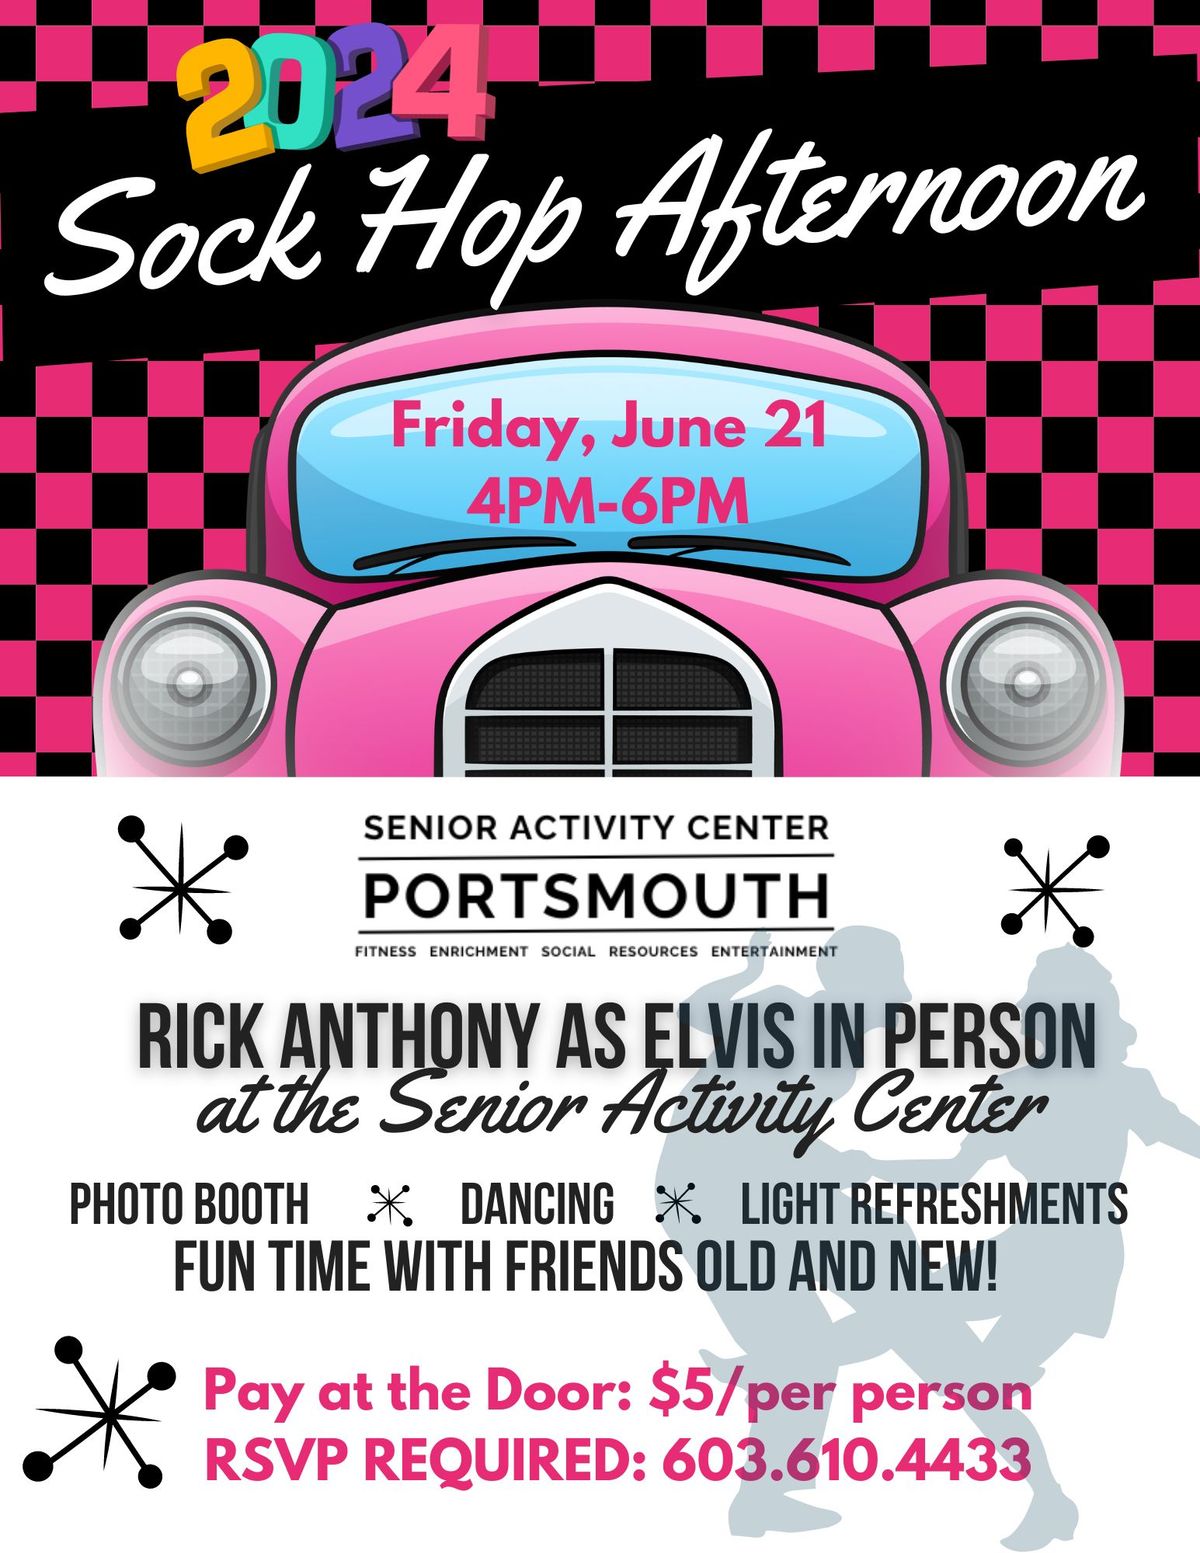 Sock Hop Afternoon with Elvis in person! 